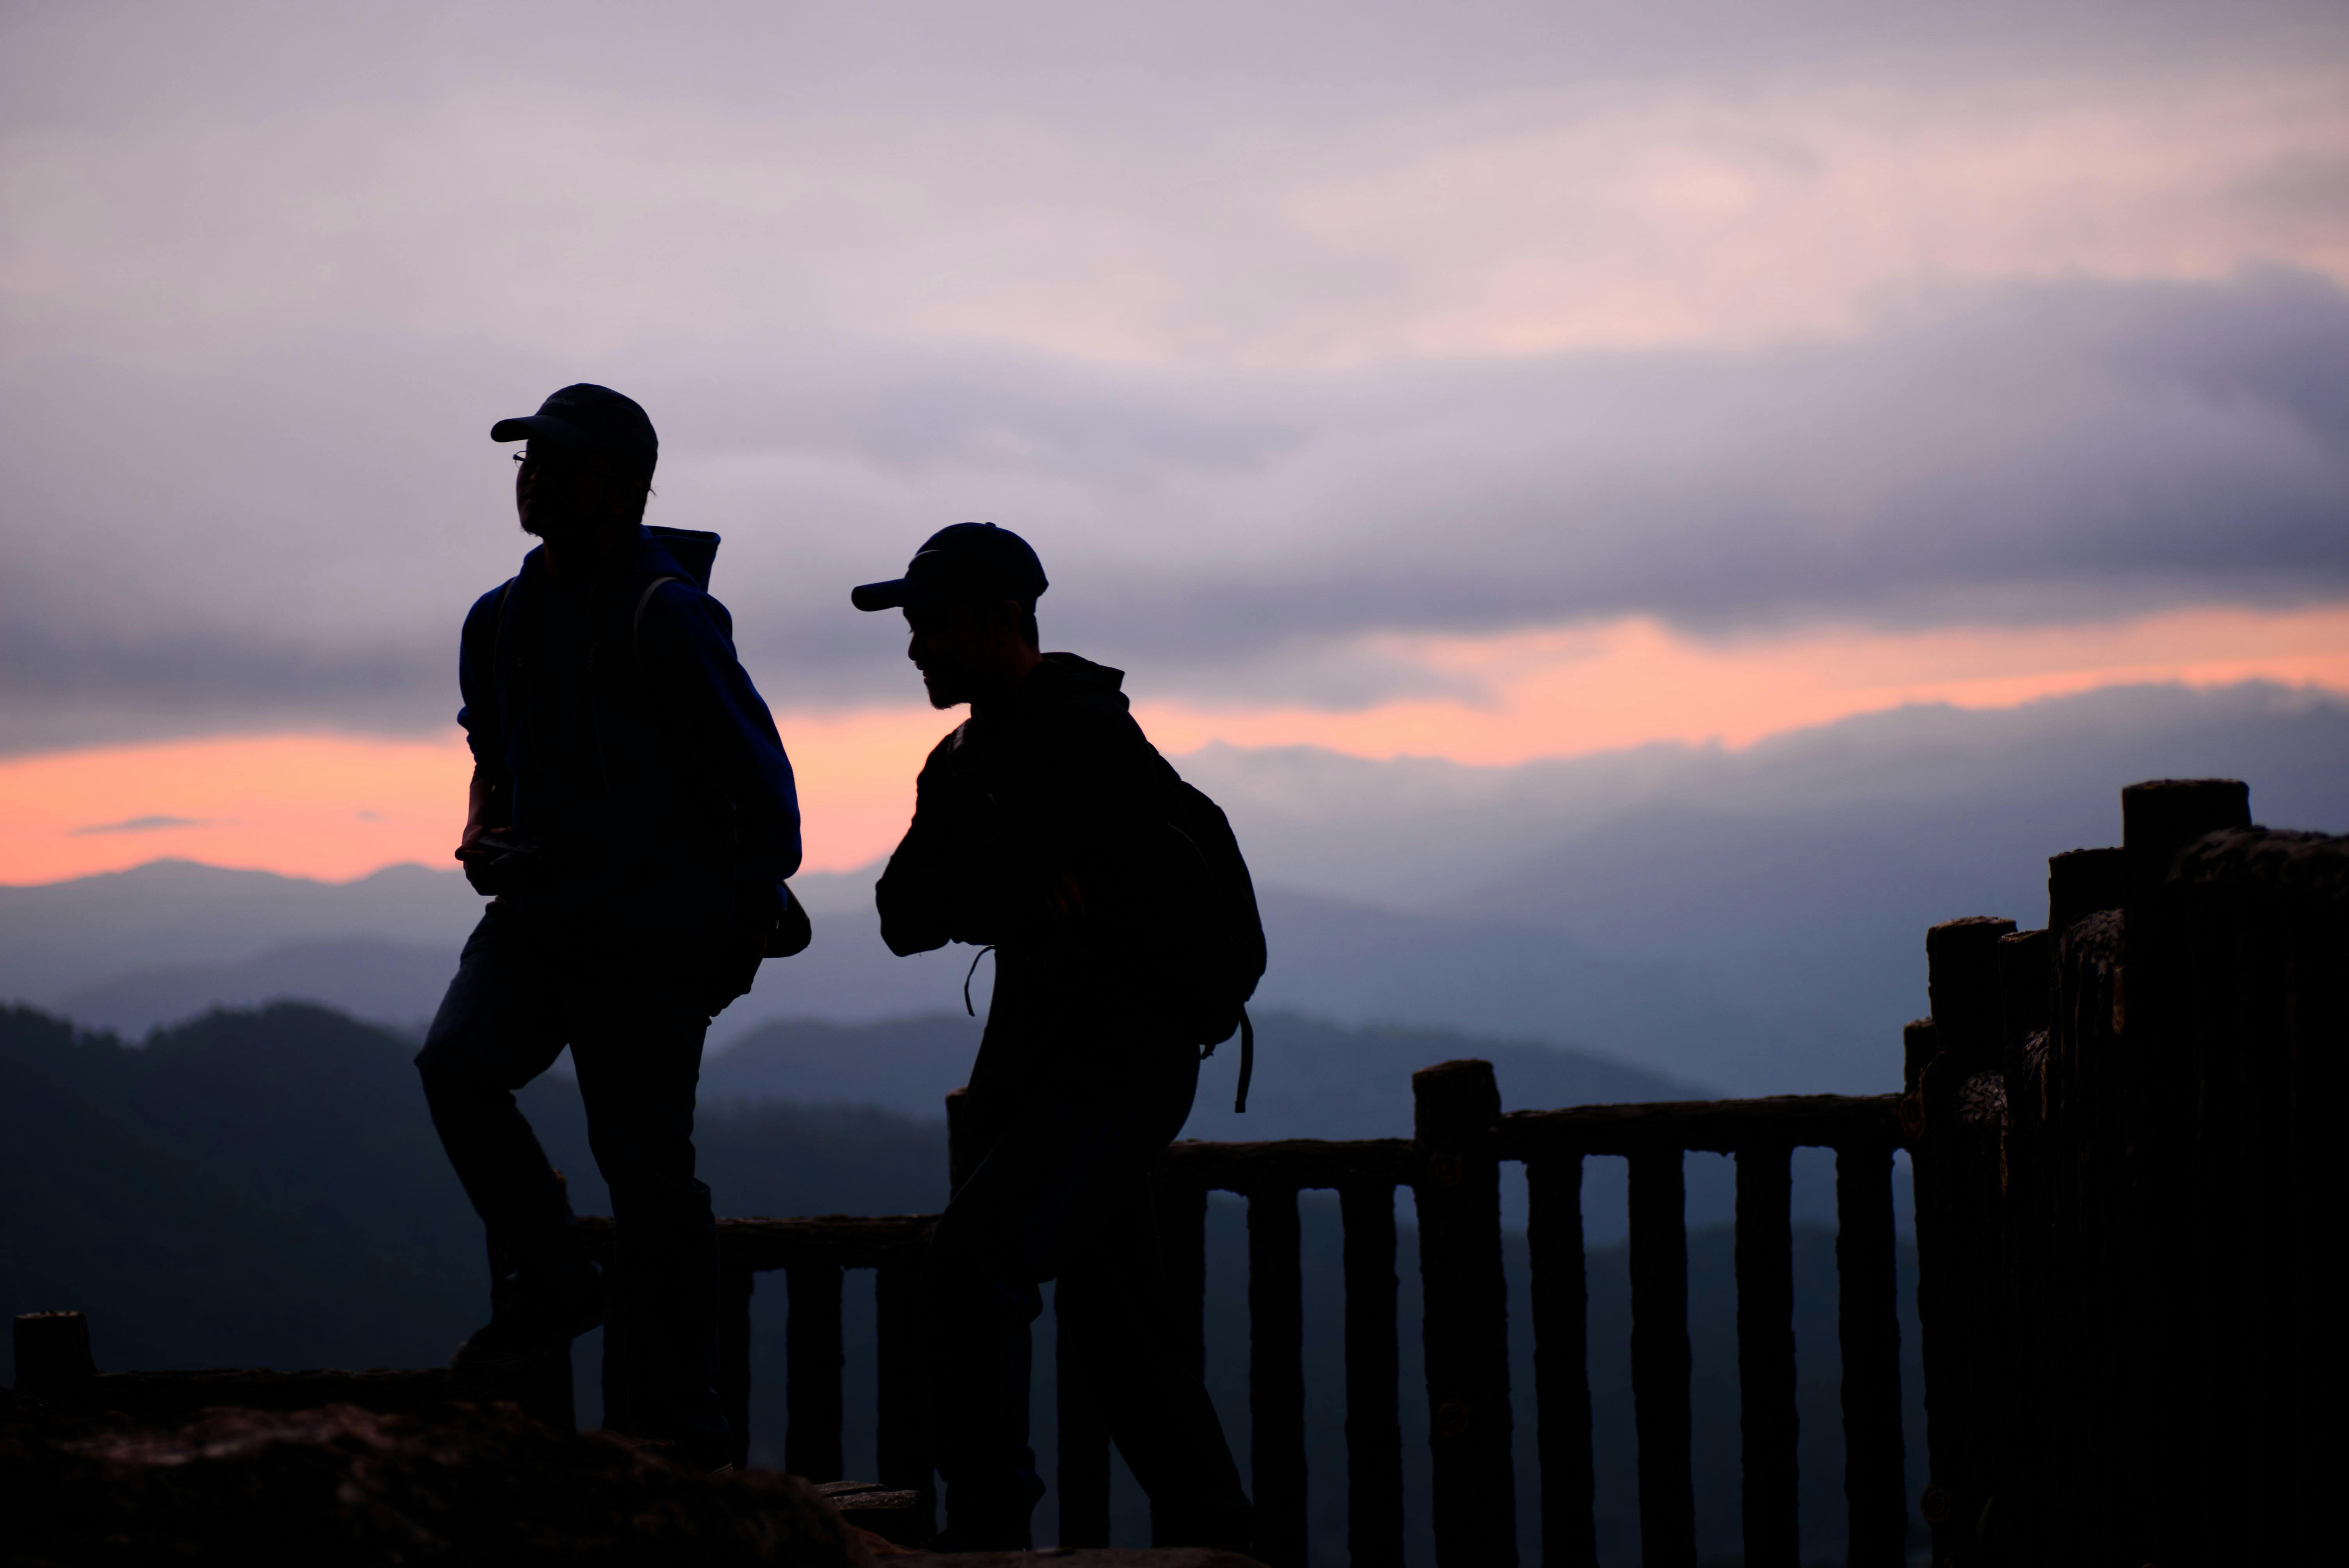 Tourists waiting for sunrise at Mines View Park in Baguio